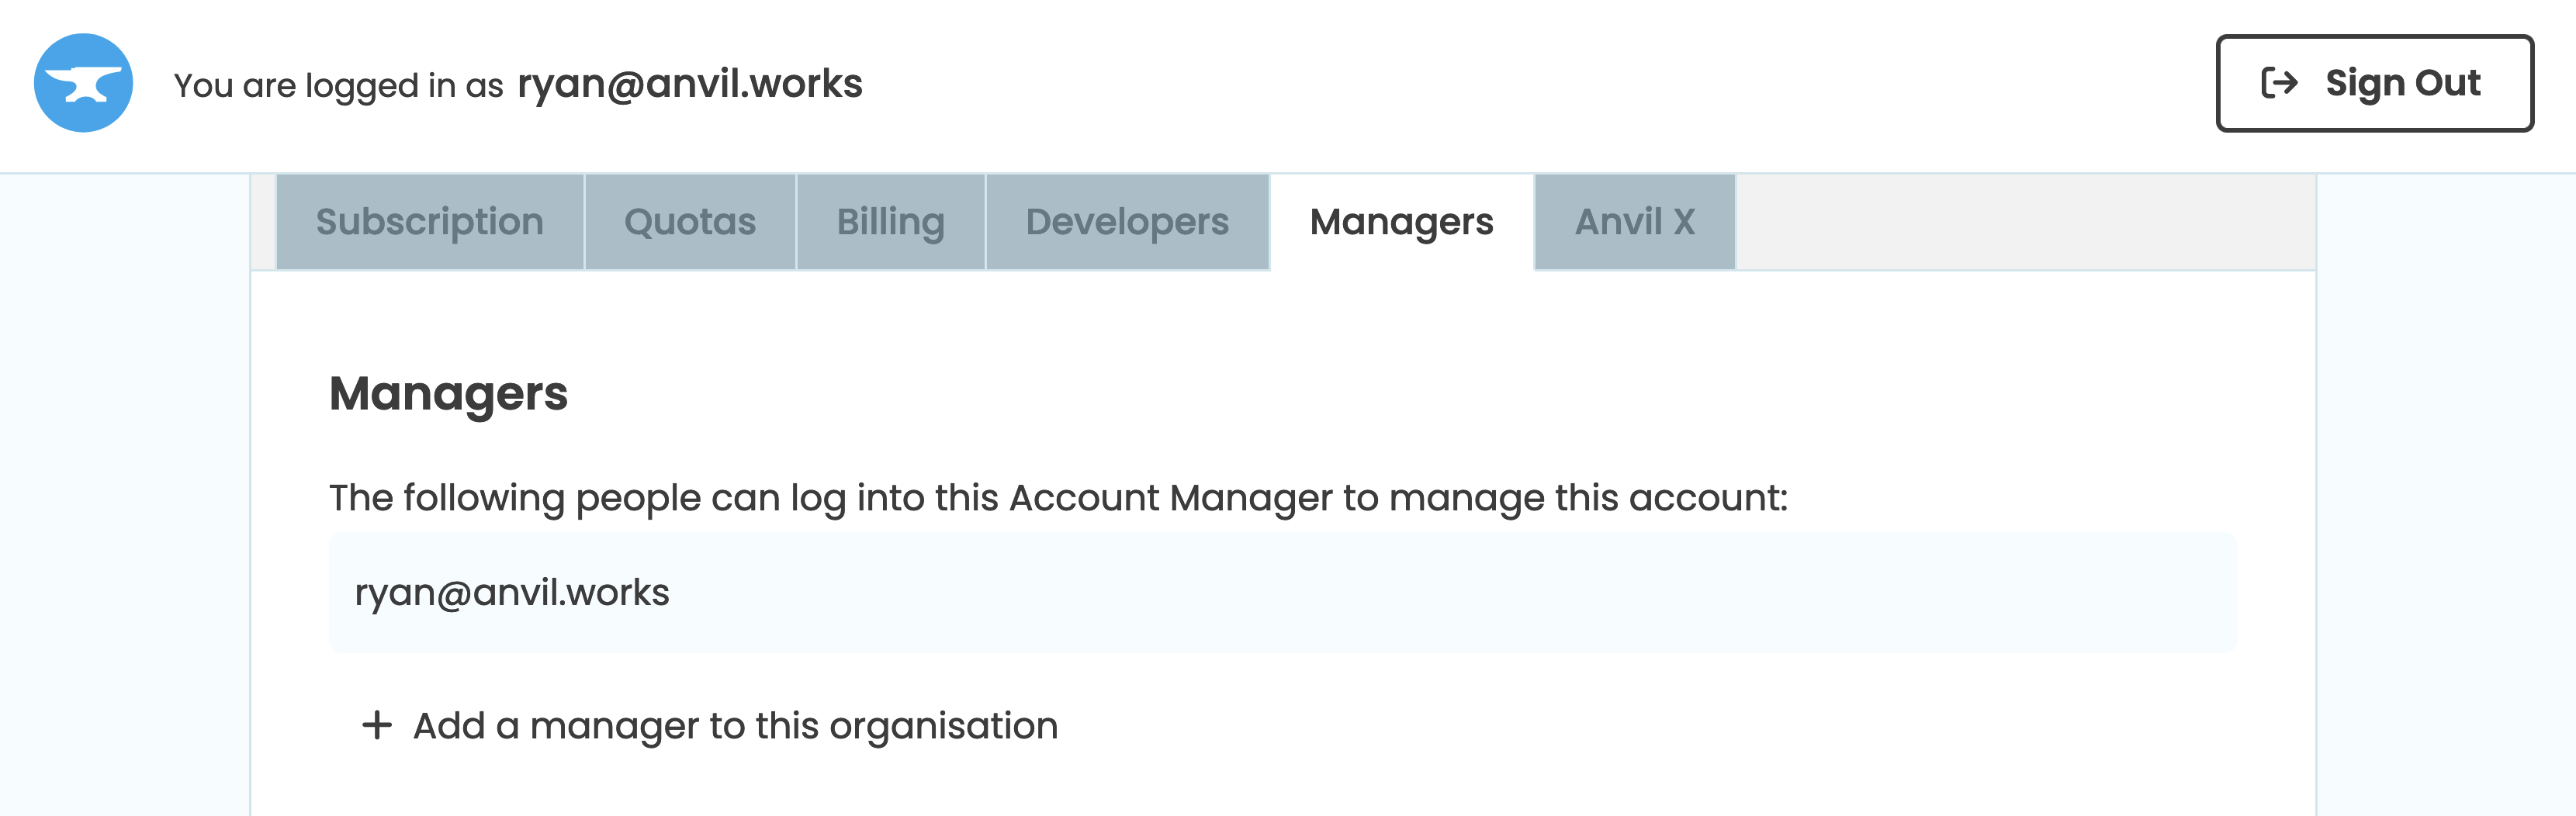 The account manager's page